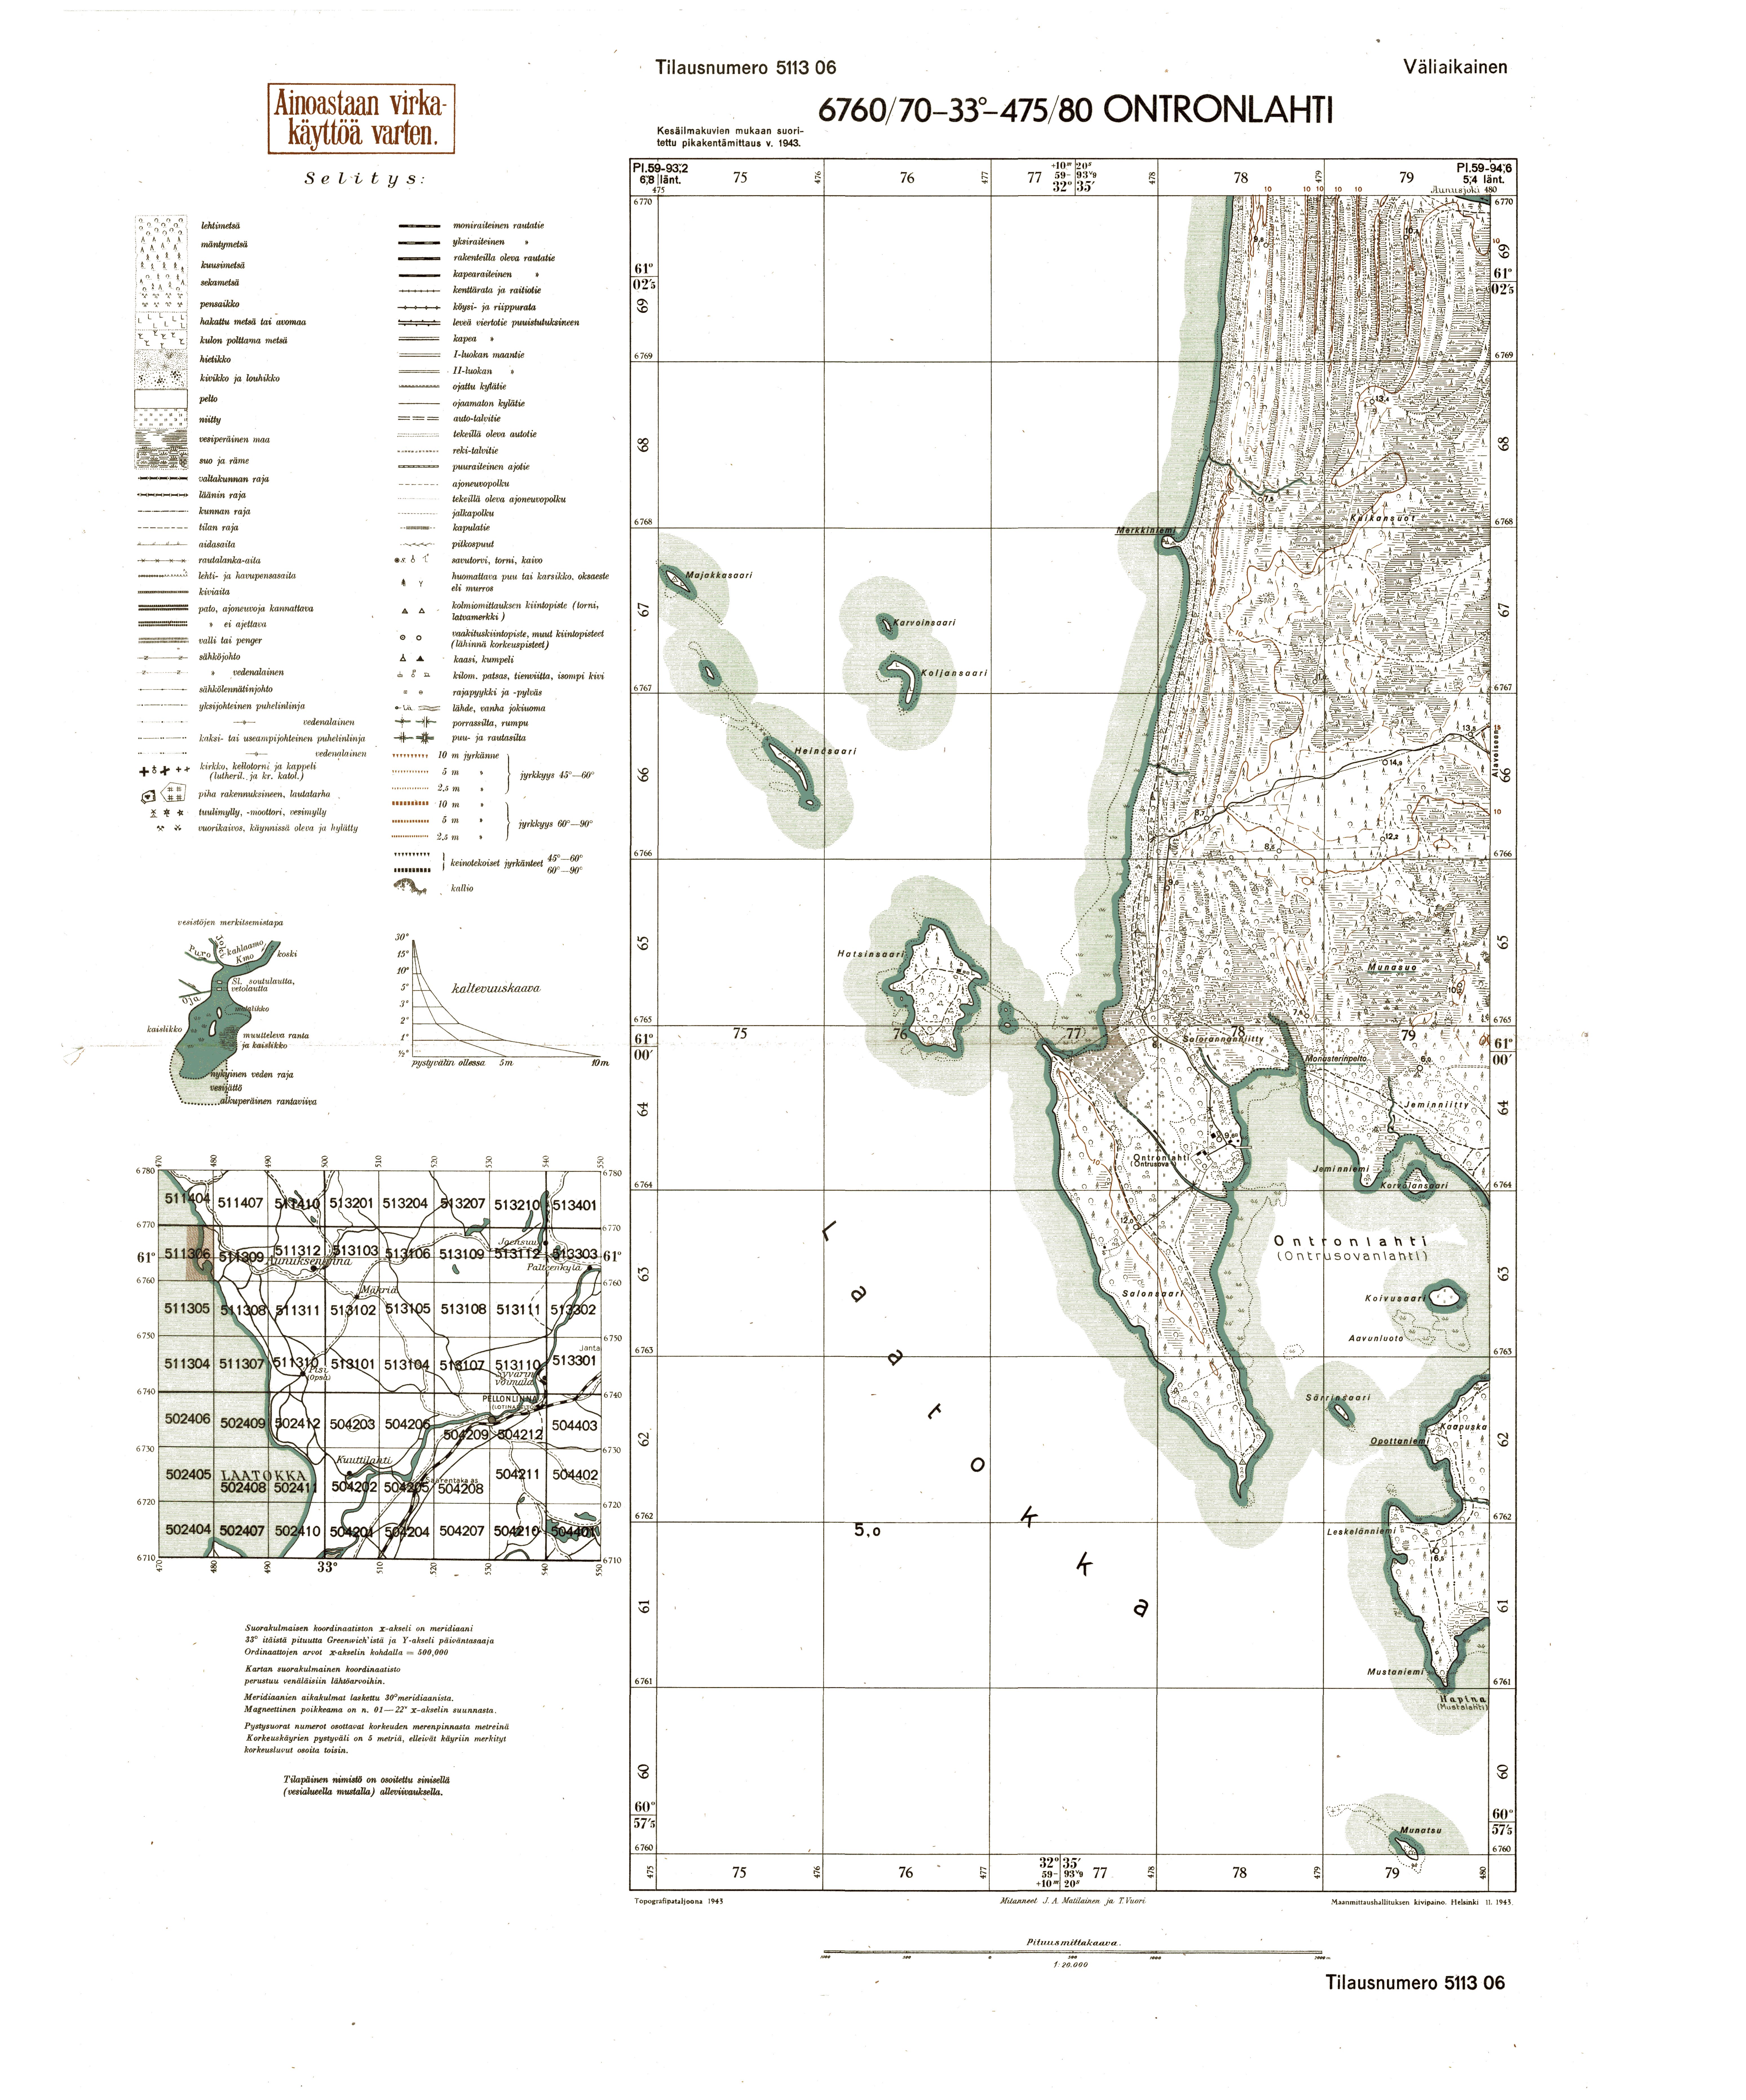 Andrusovskaja Buhta. Ontronlahti. Topografikartta 511306. Topographic map from 1943. Use the zooming tool to explore in higher level of detail. Obtain as a quality print or high resolution image